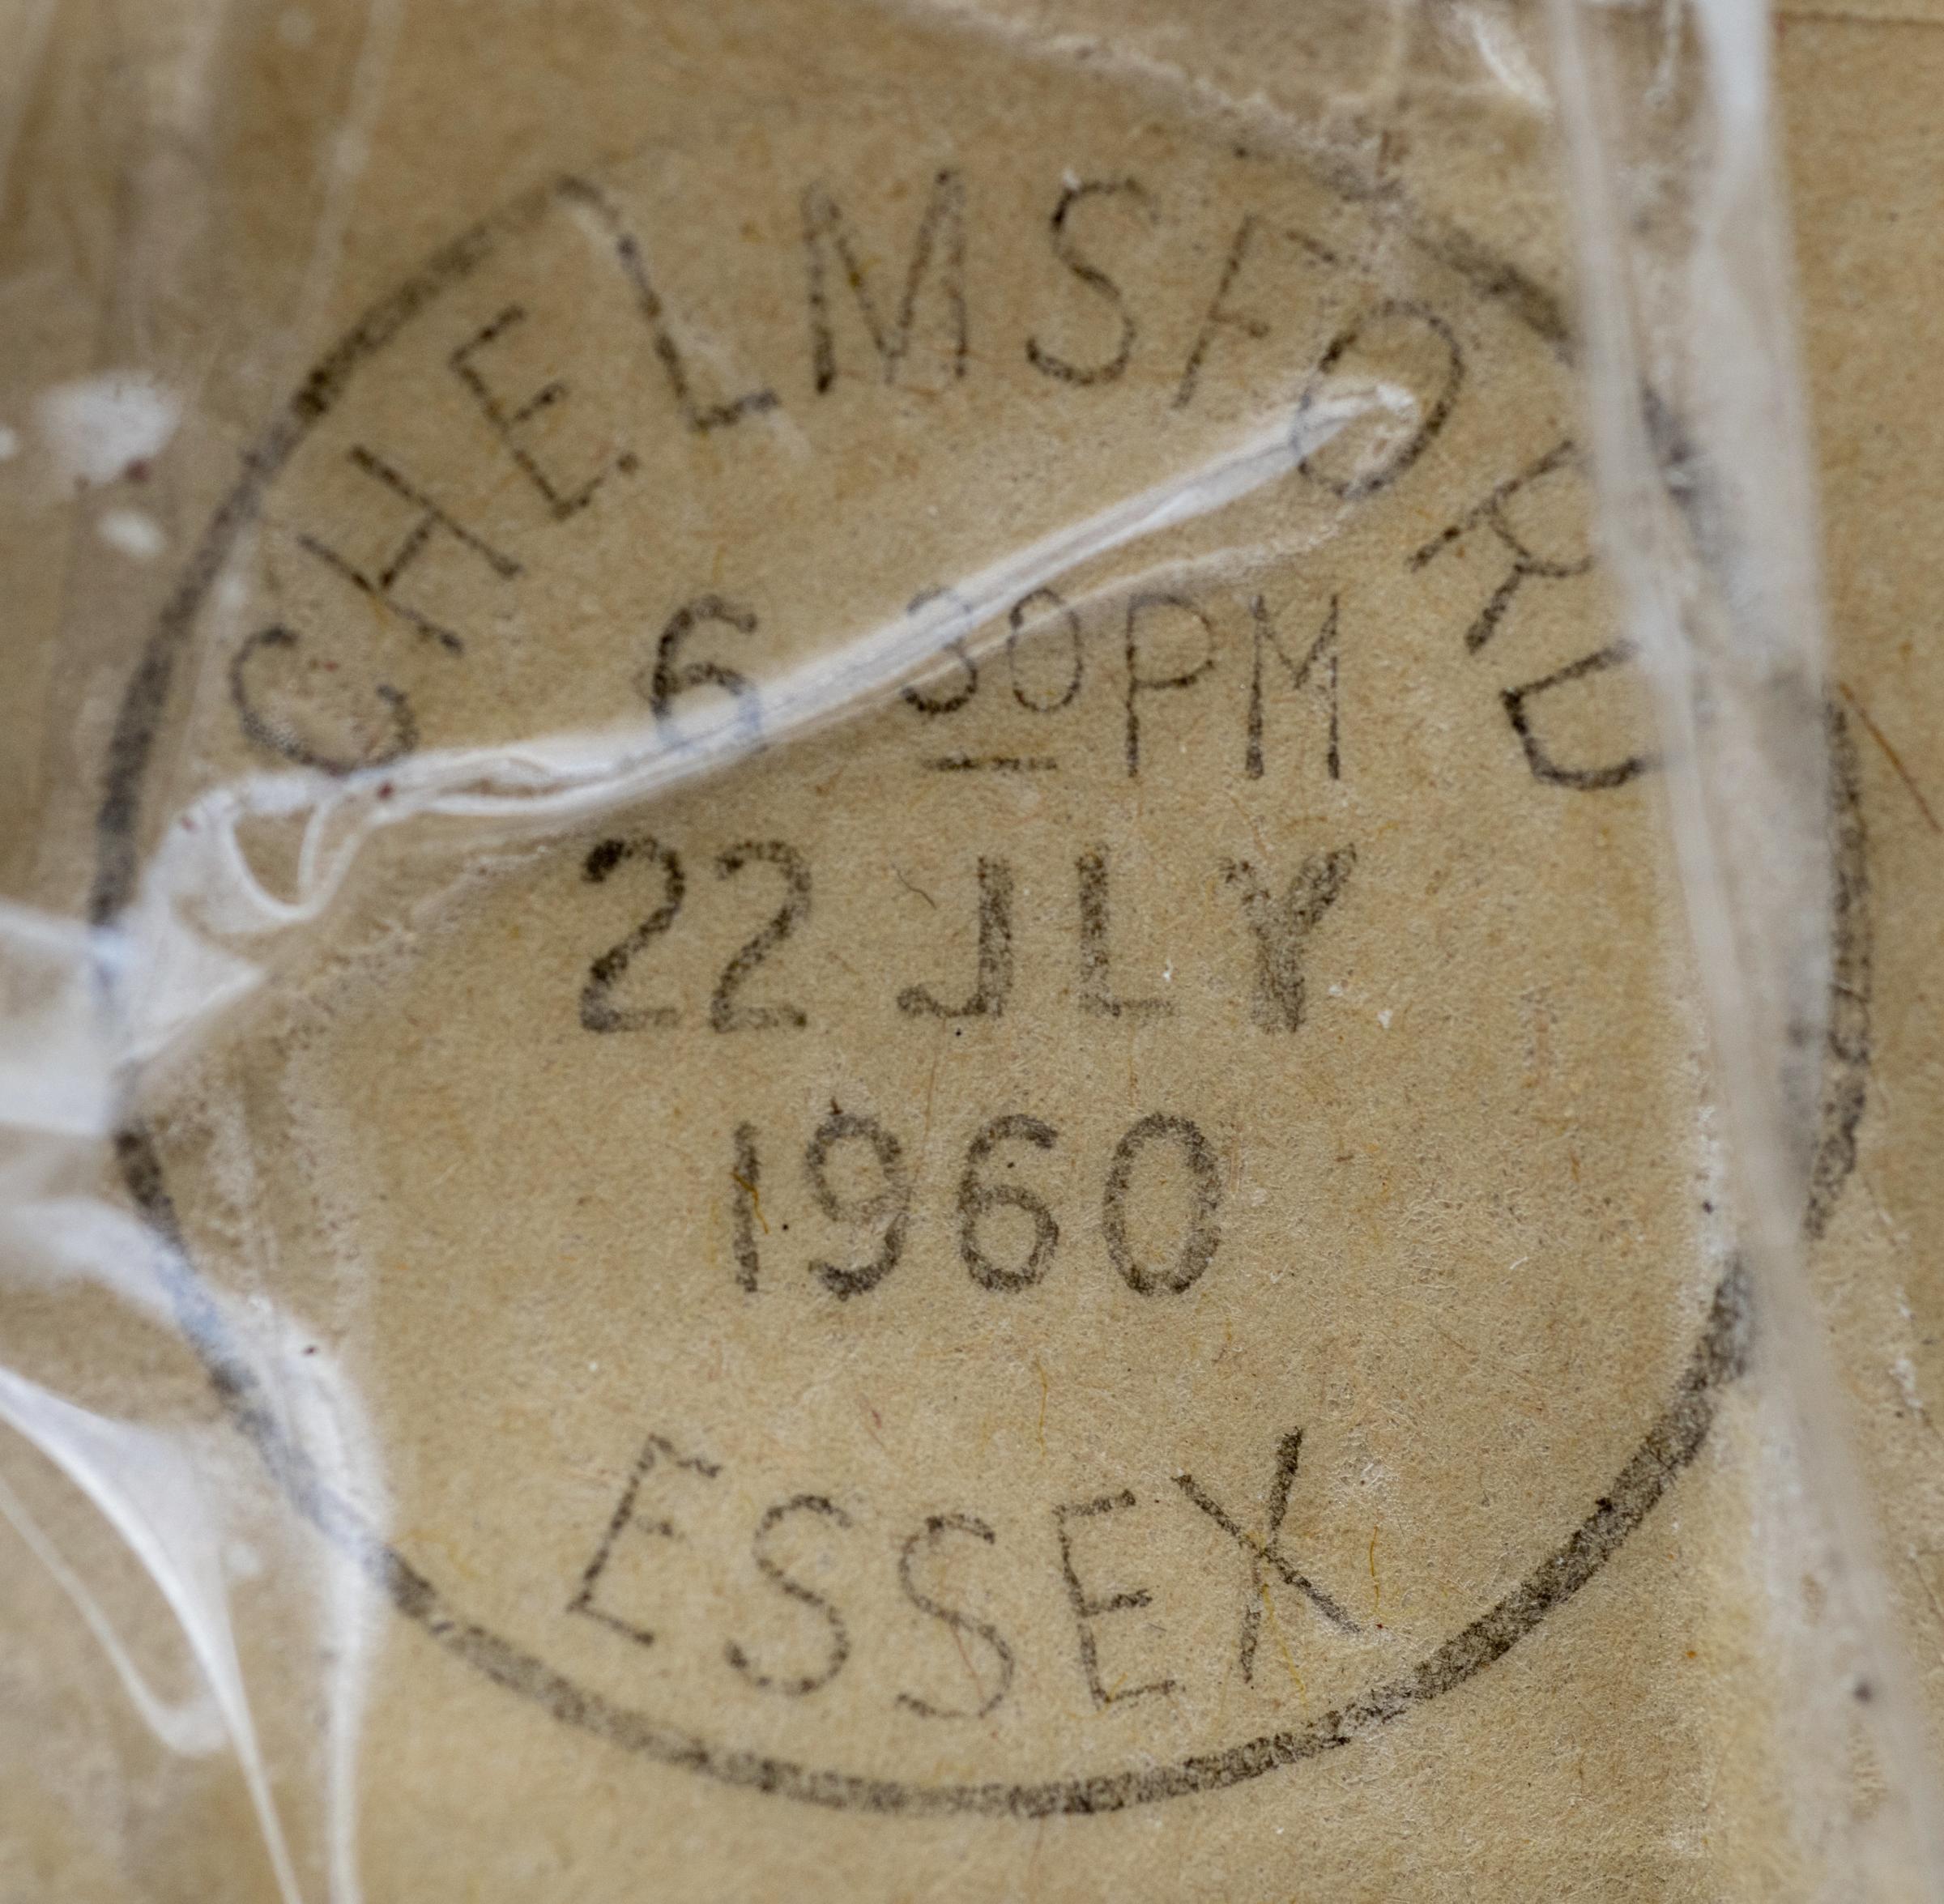 The package has a postmark from Chelmsford, Essex dated 6:30pm 22 July 1960 and two one-and-a-half old pence stamps. 